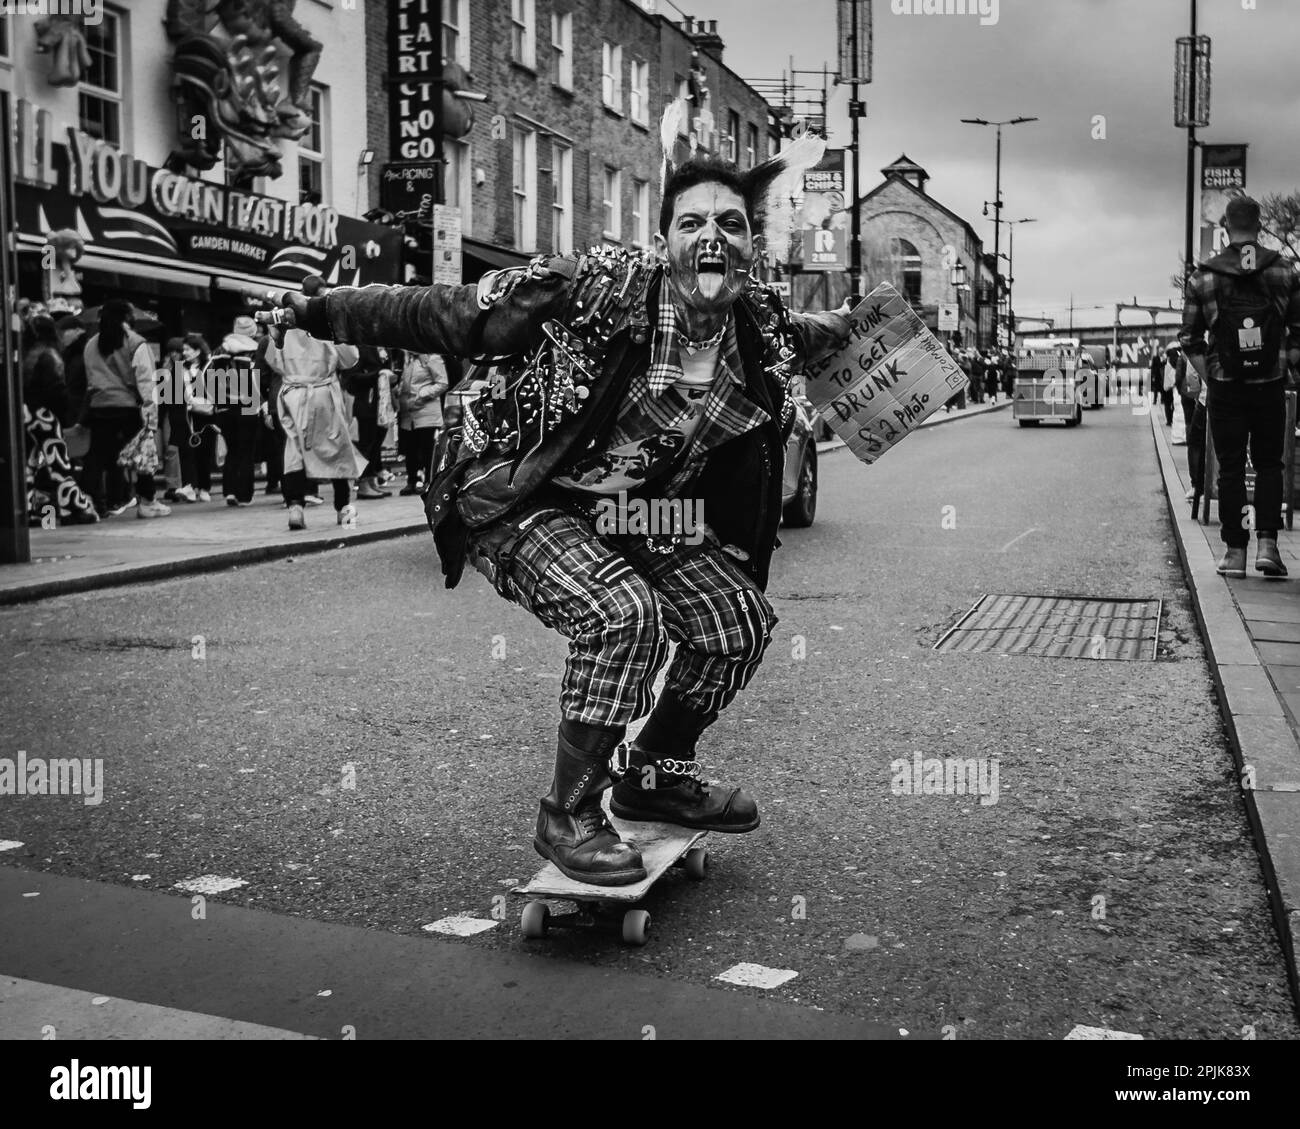 A black and white image of a punk skateboarding in London's Camden Town. Stock Photo